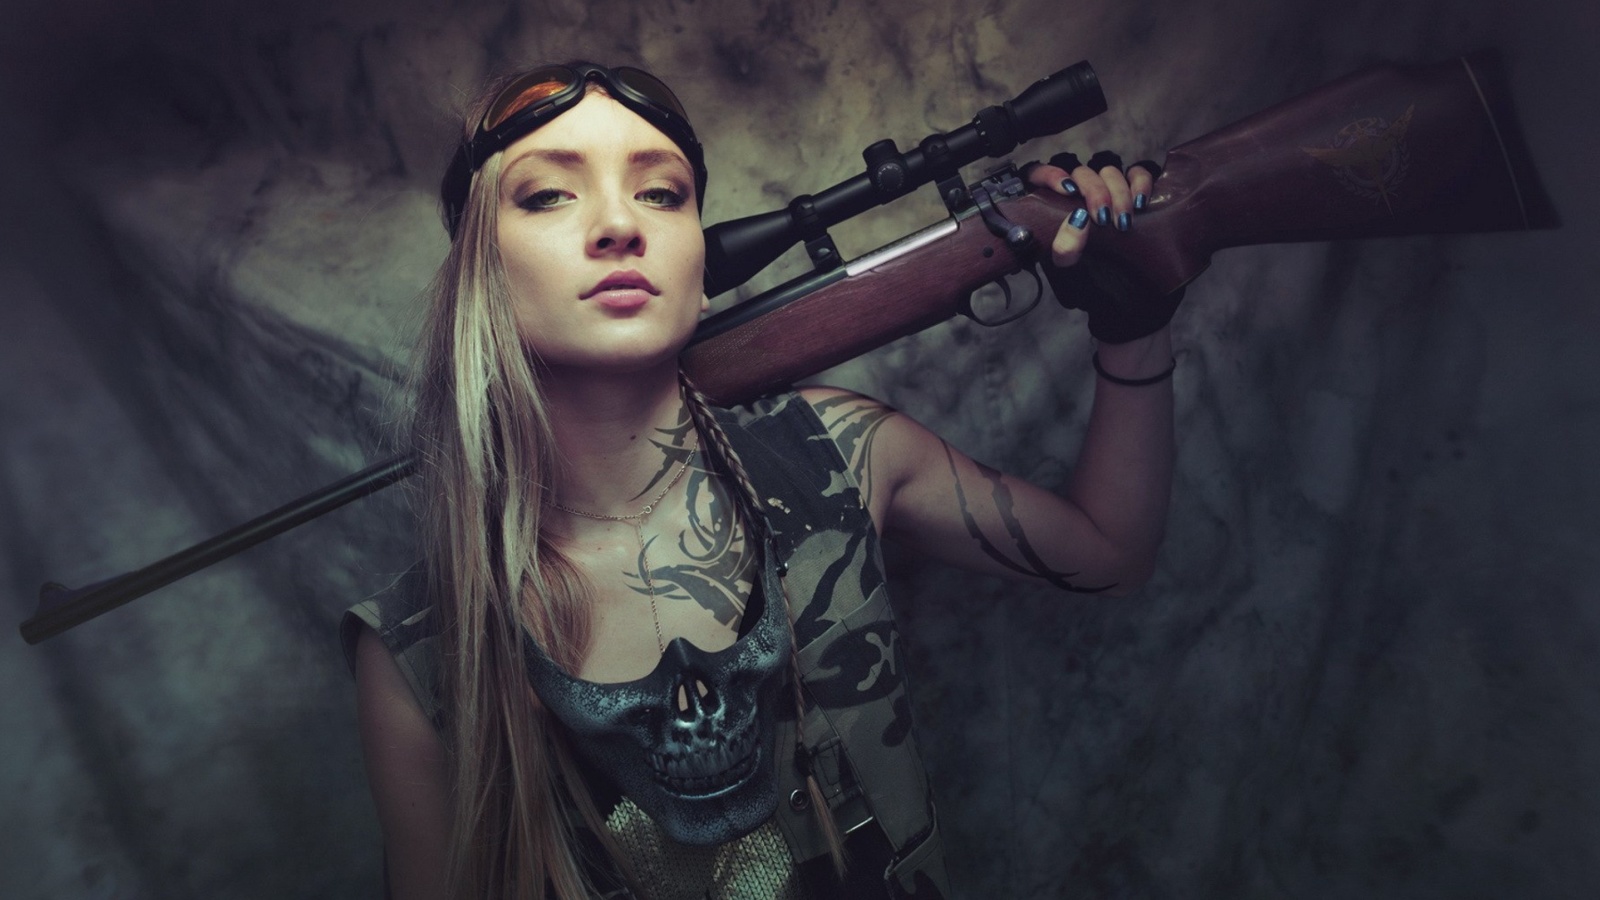 Soldier girl with a sniper rifle screenshot #1 1600x900